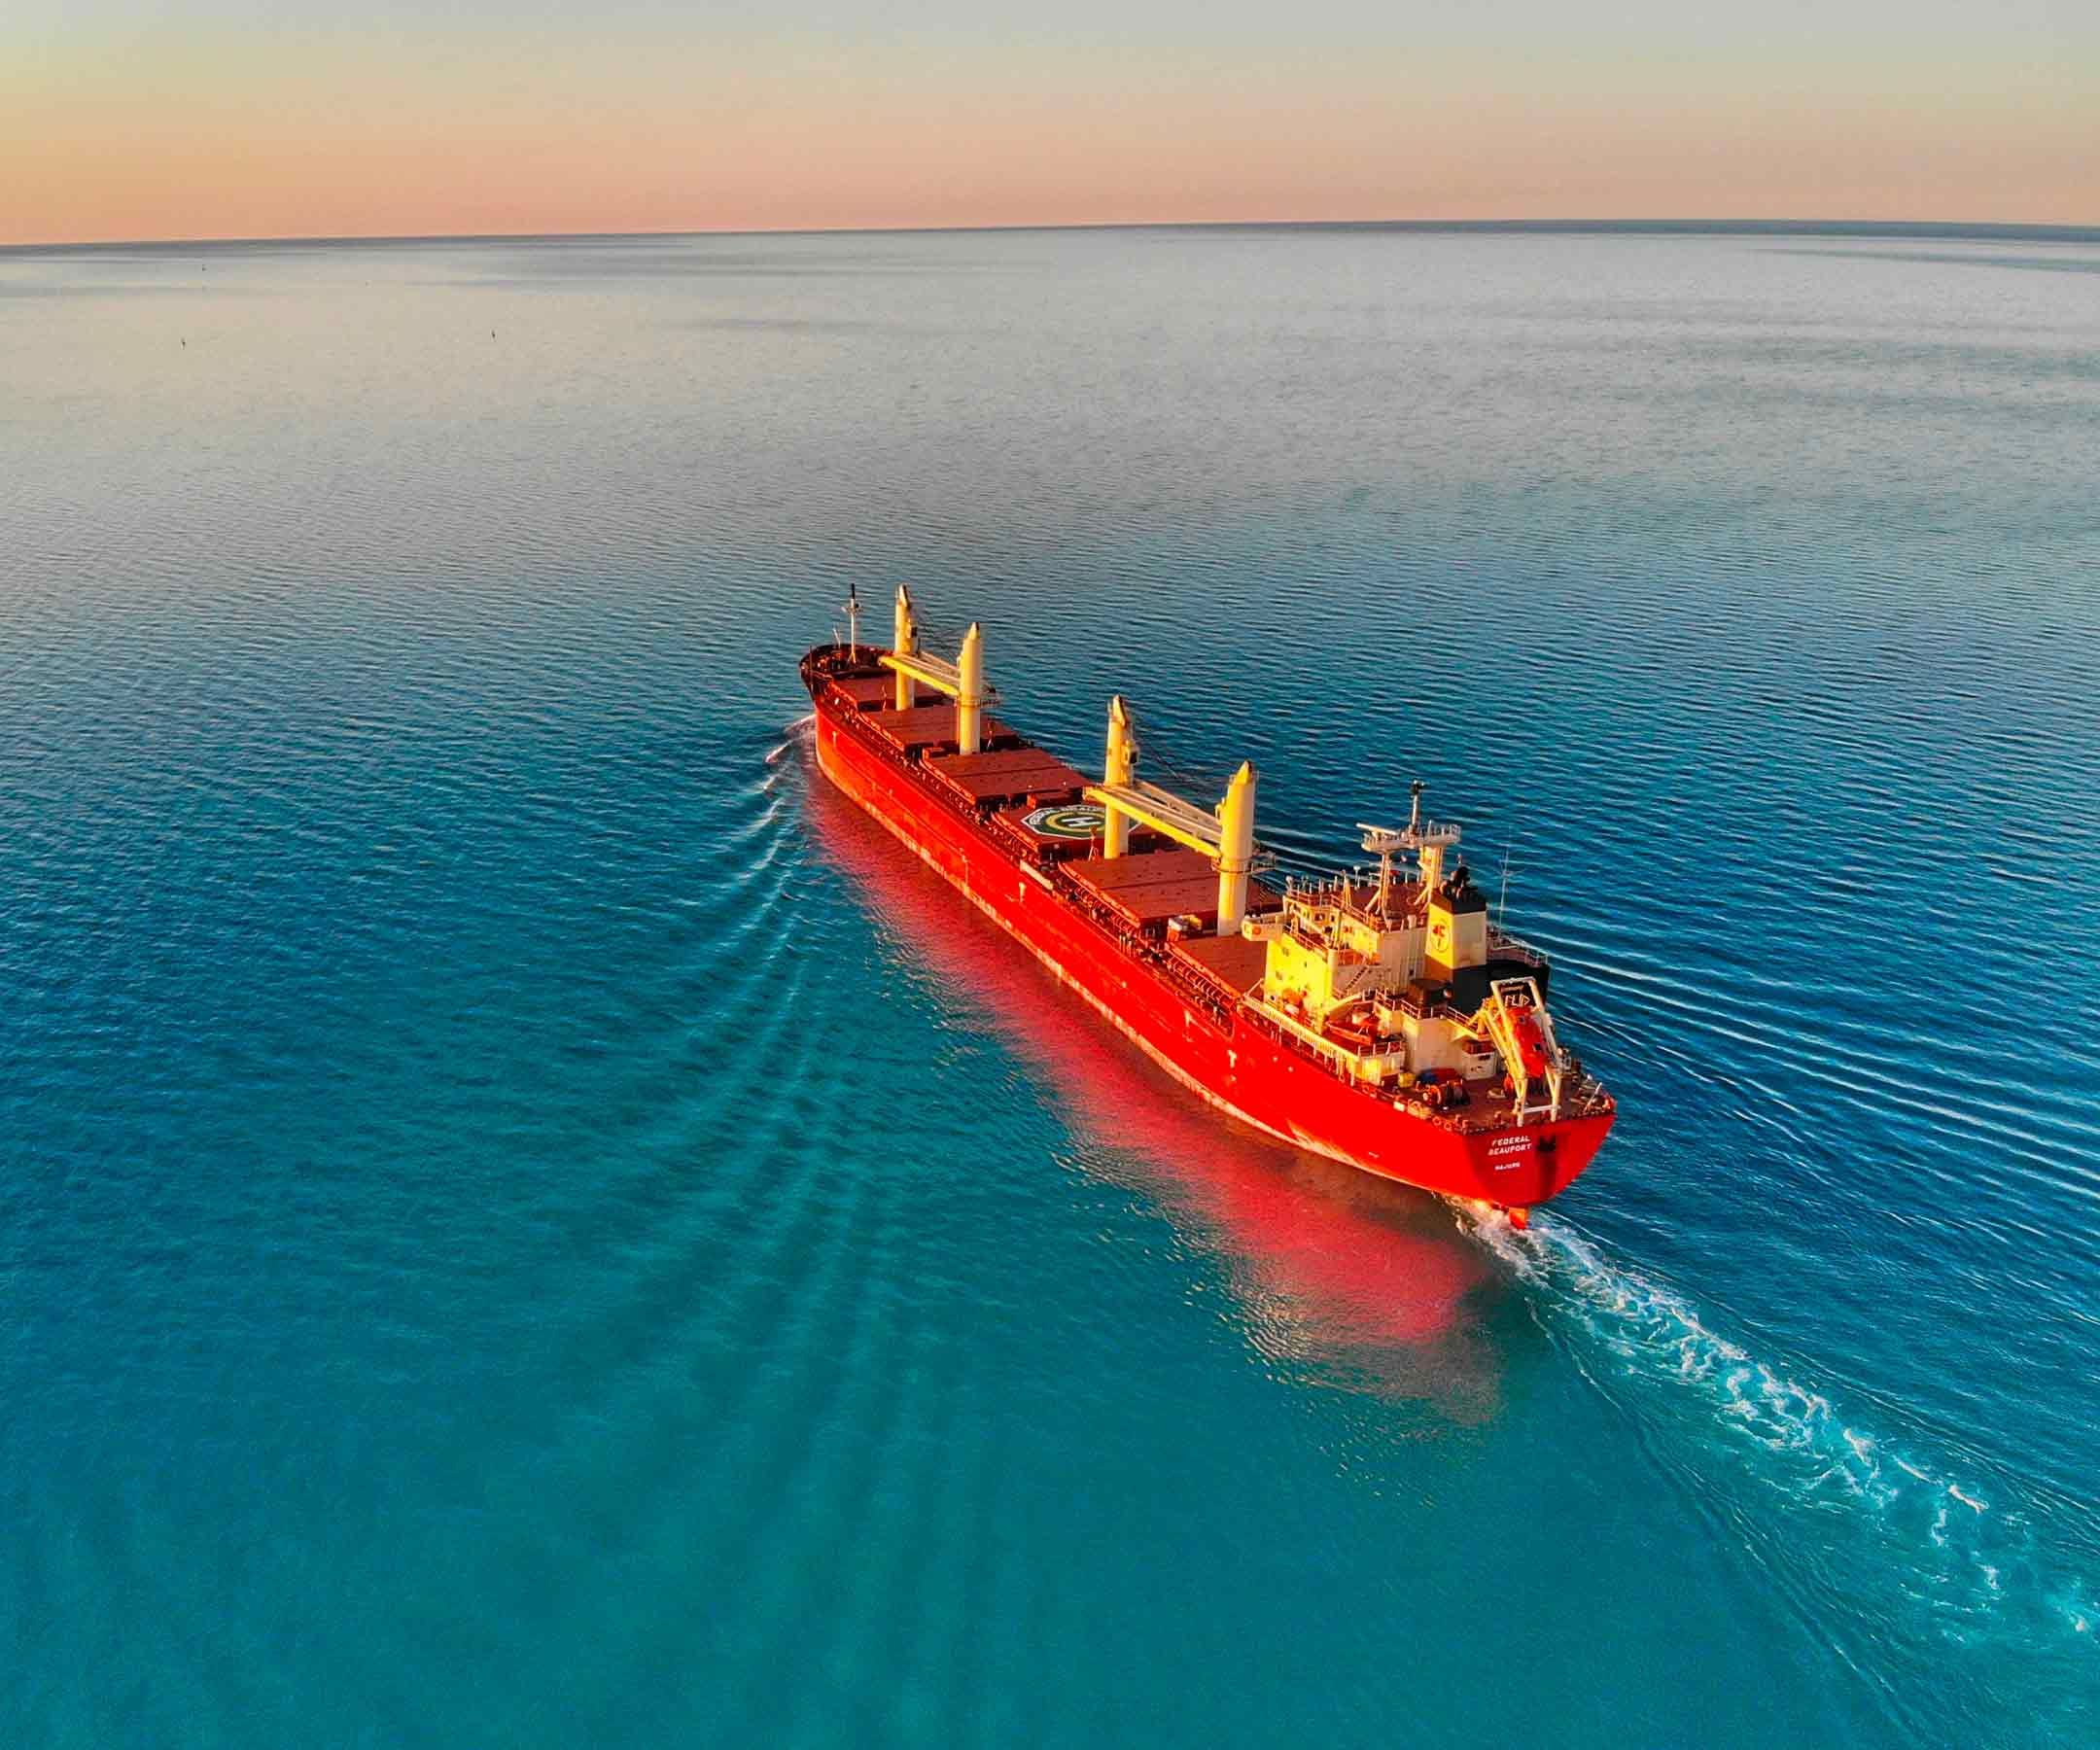 a large red ship in the ocean